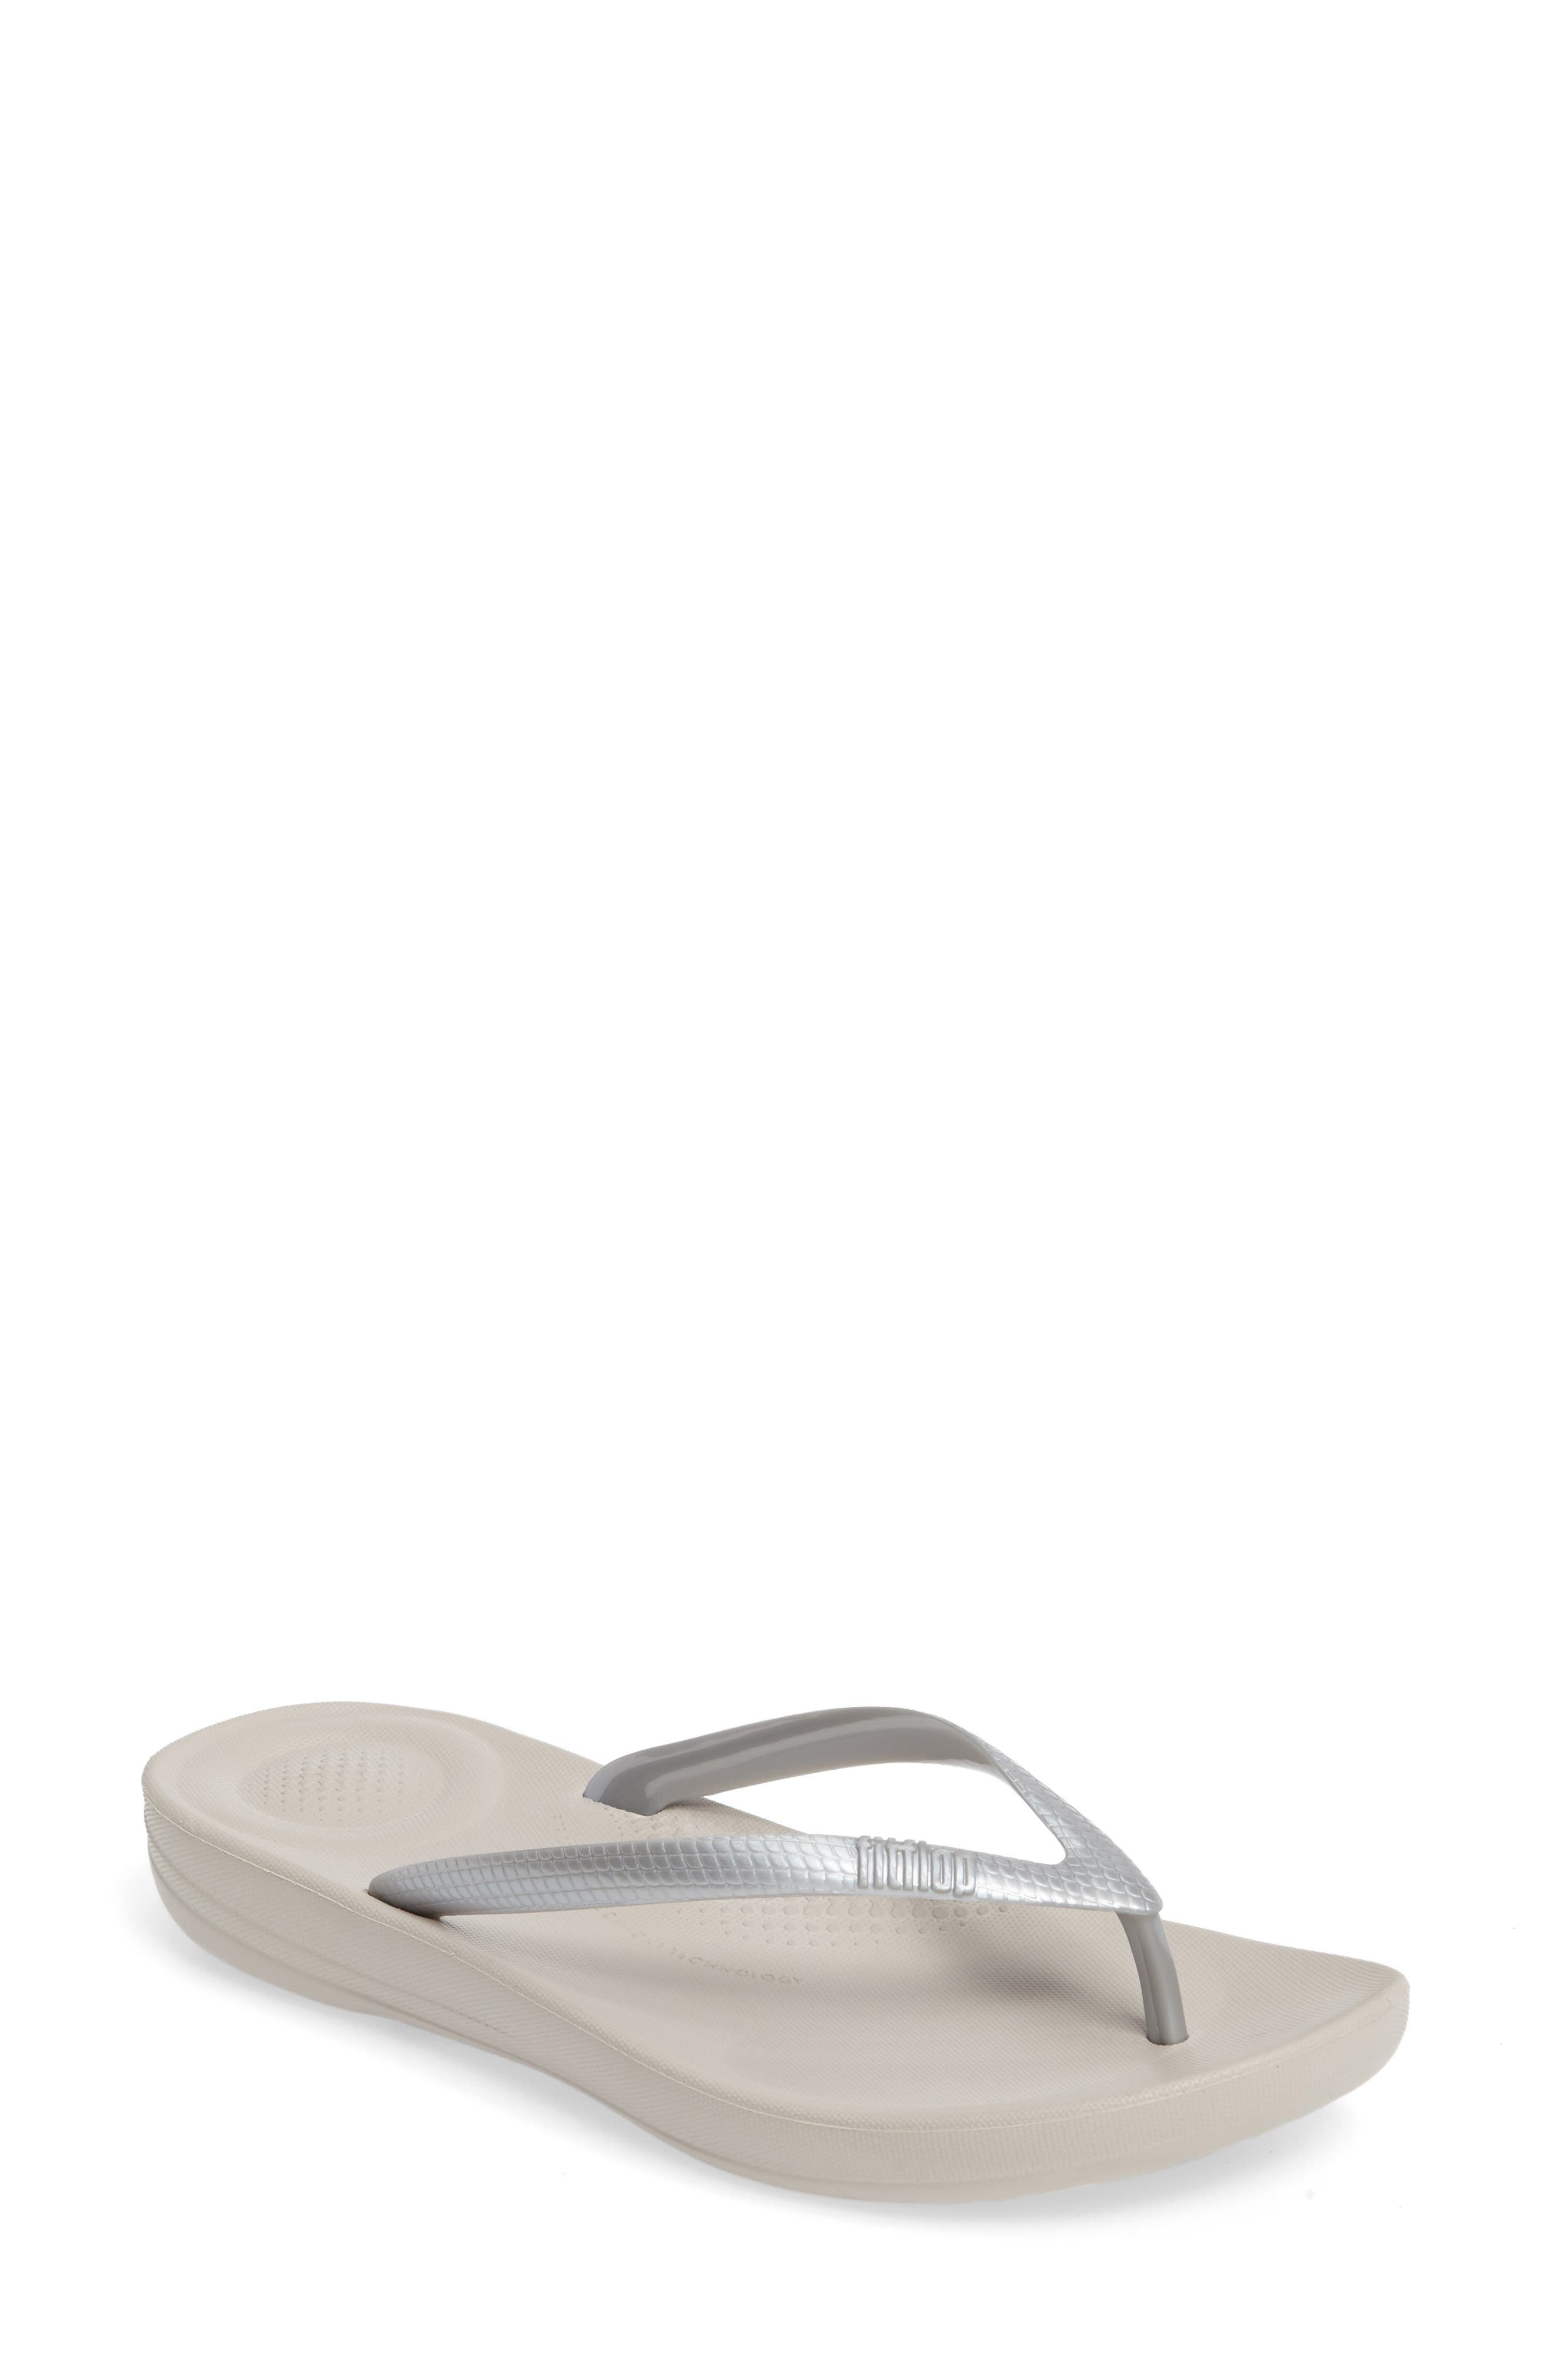 FITFLOP IQUSHION FLIP FLOP,190035430696